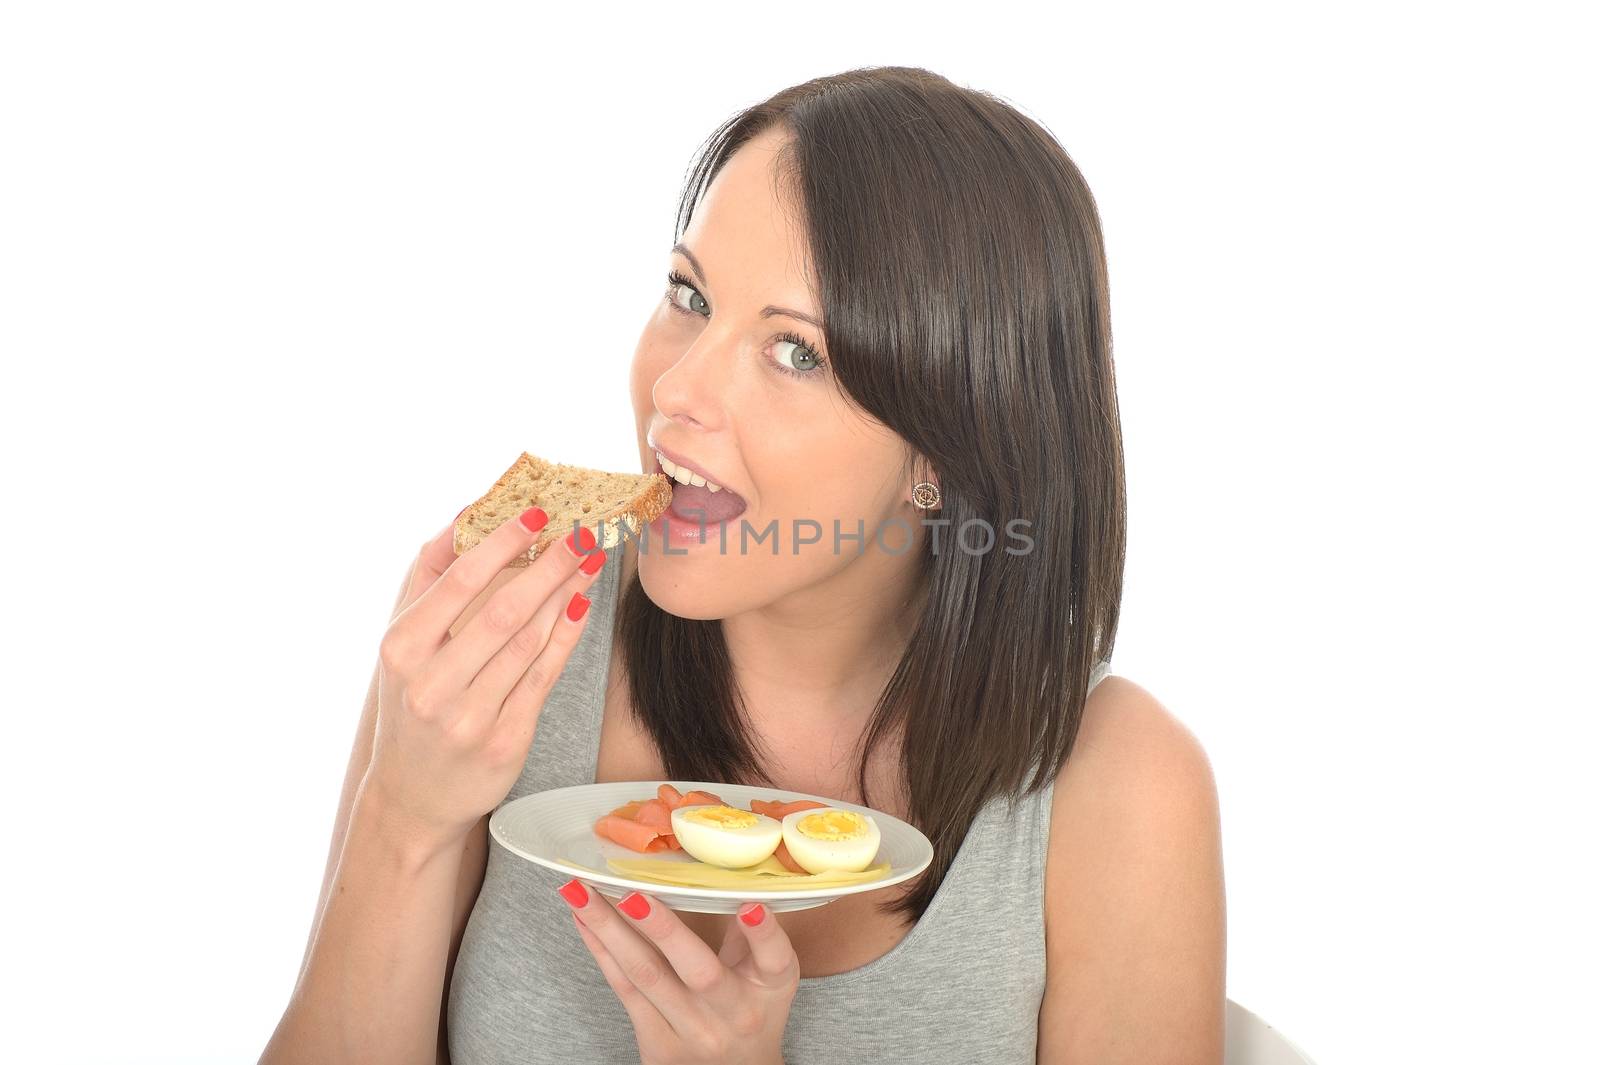 Attractive Young Woman Holding a Typical Healthy Norwegian Break by Whiteboxmedia